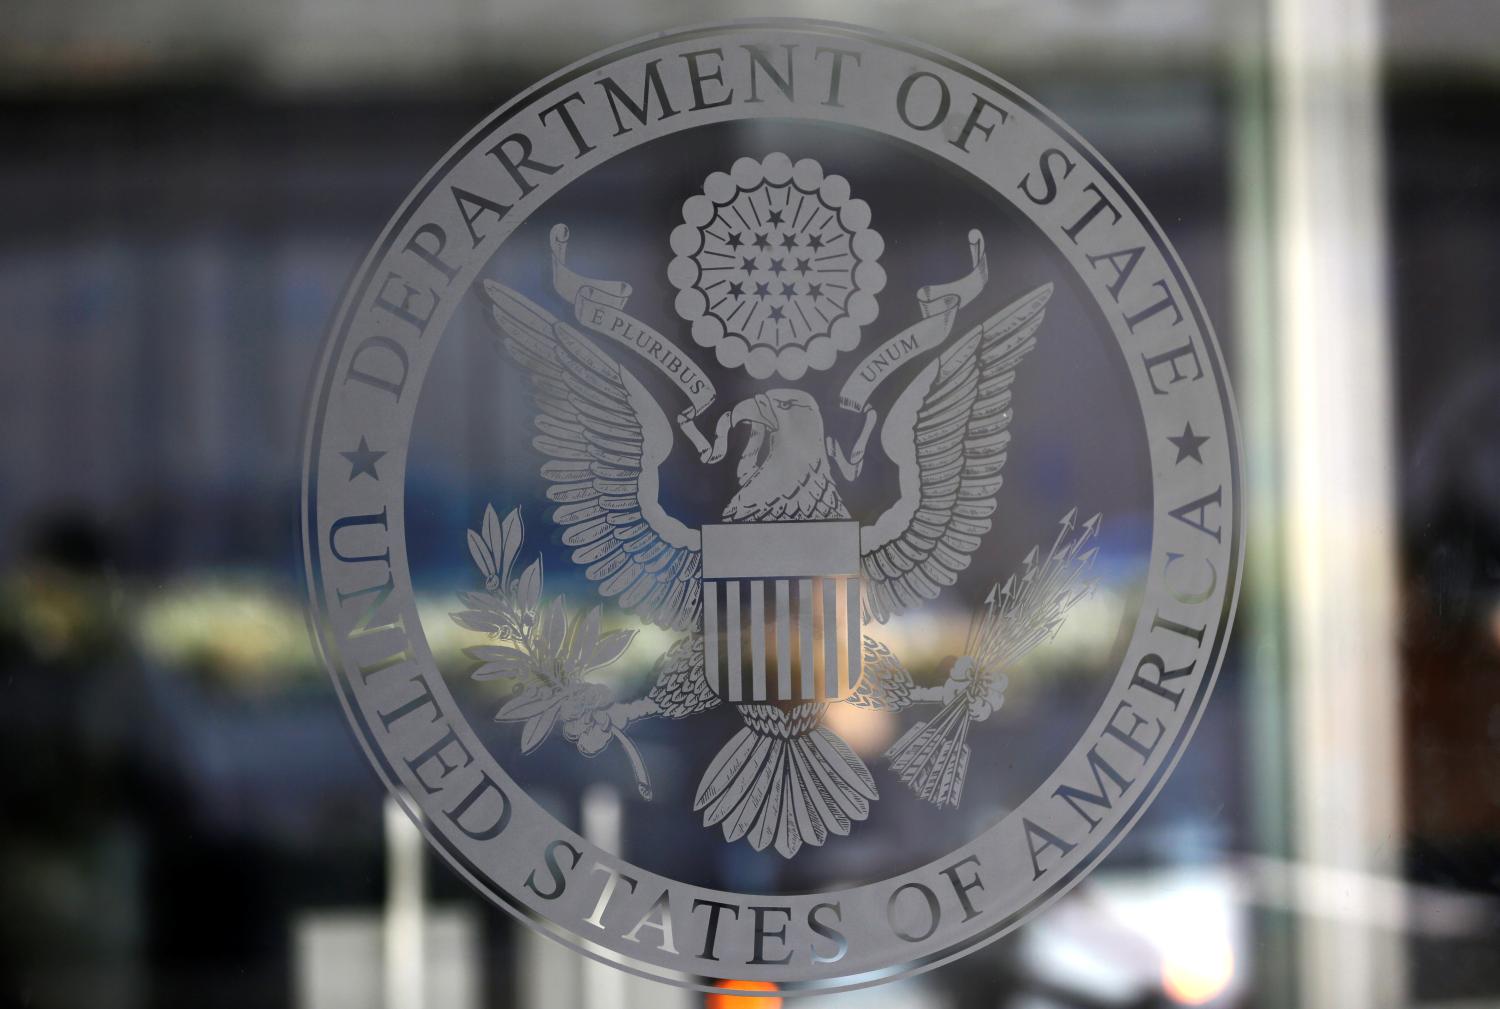 The seal of the United States Department of State is seen in Washington, U.S., January 26, 2017.      REUTERS/Joshua Roberts - RC1DC84D5960